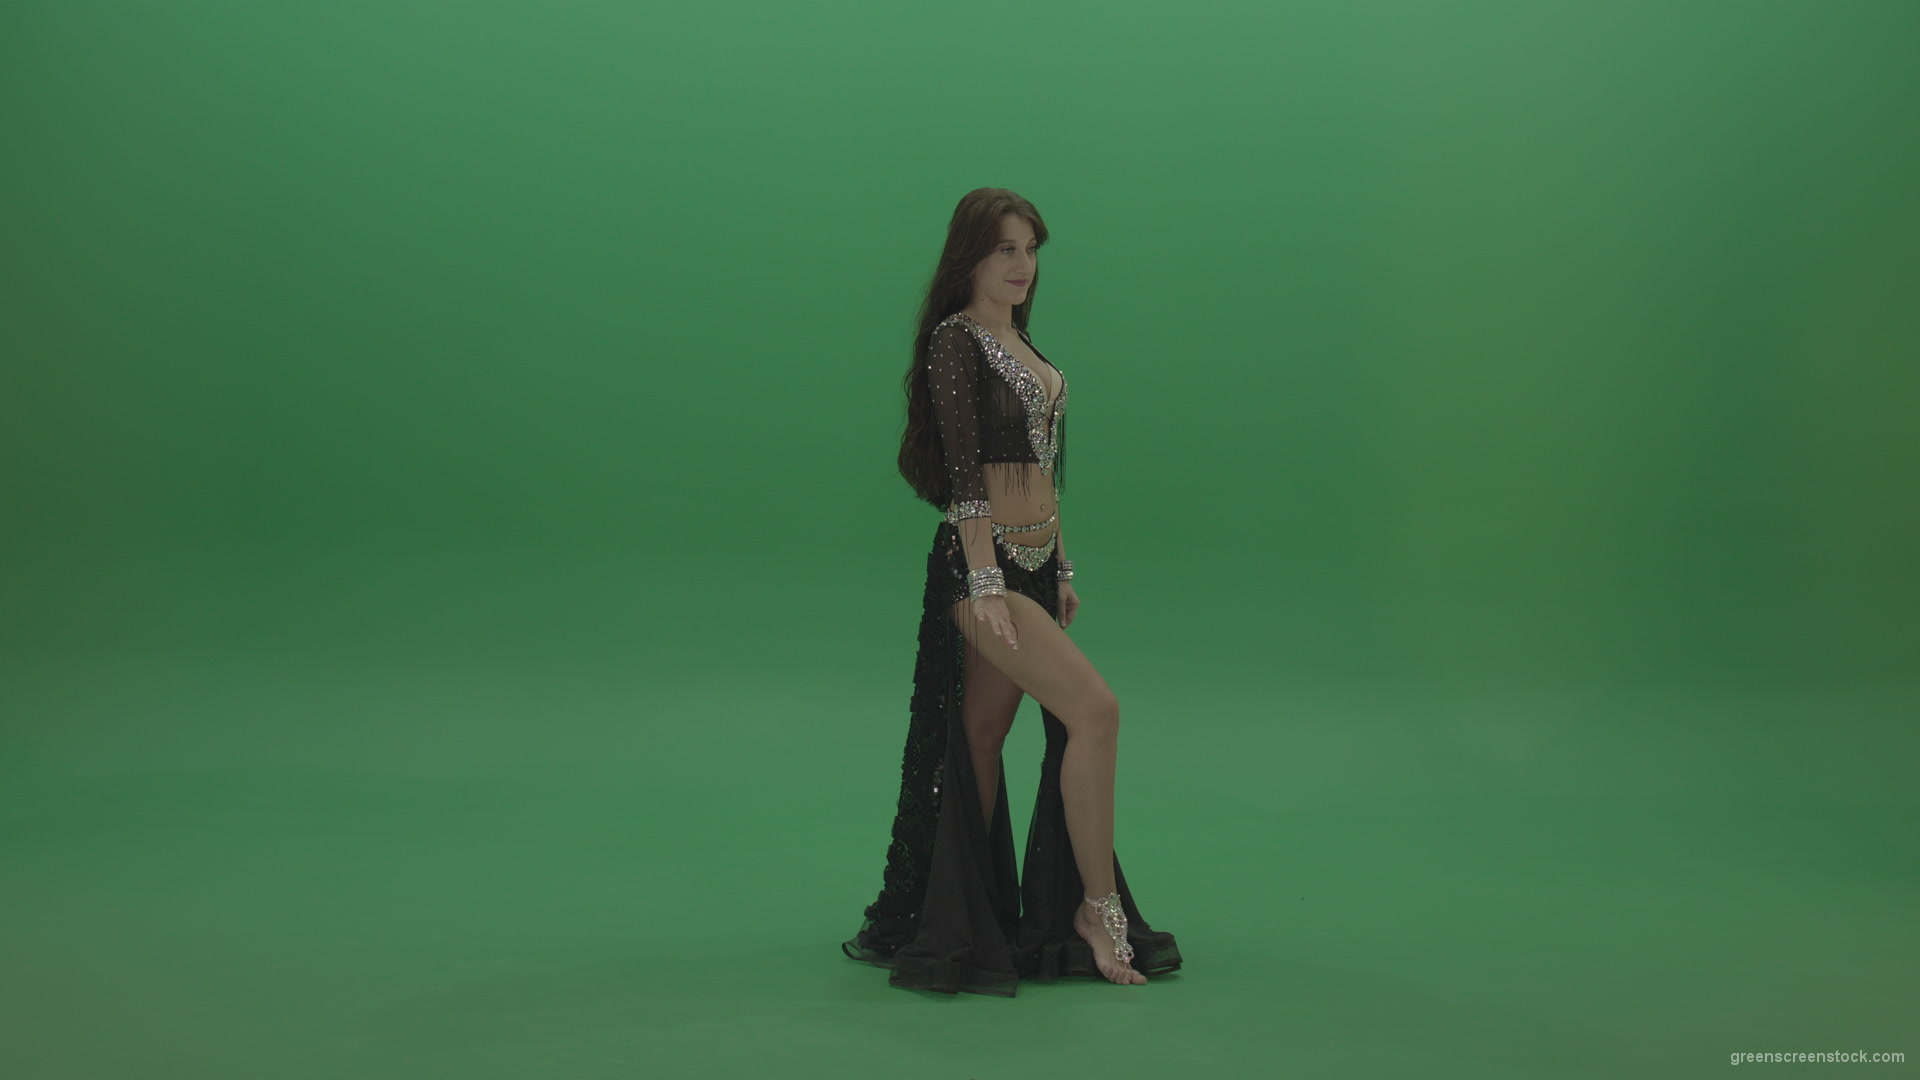 Gorgeous-belly-dancer-in-black-wear-display-amazing-dance-moves-over-chromakey-background_001 Green Screen Stock